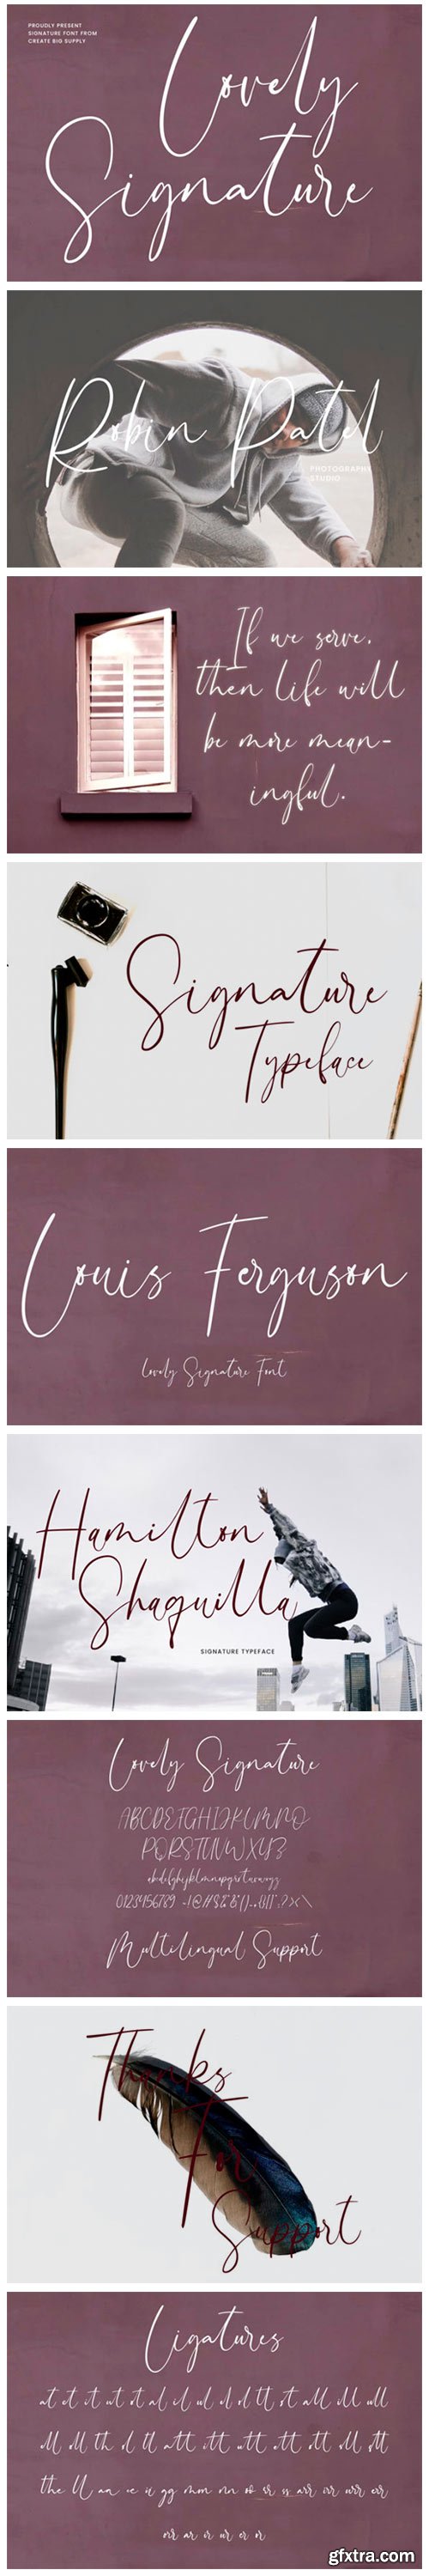 Lovely Signature Font